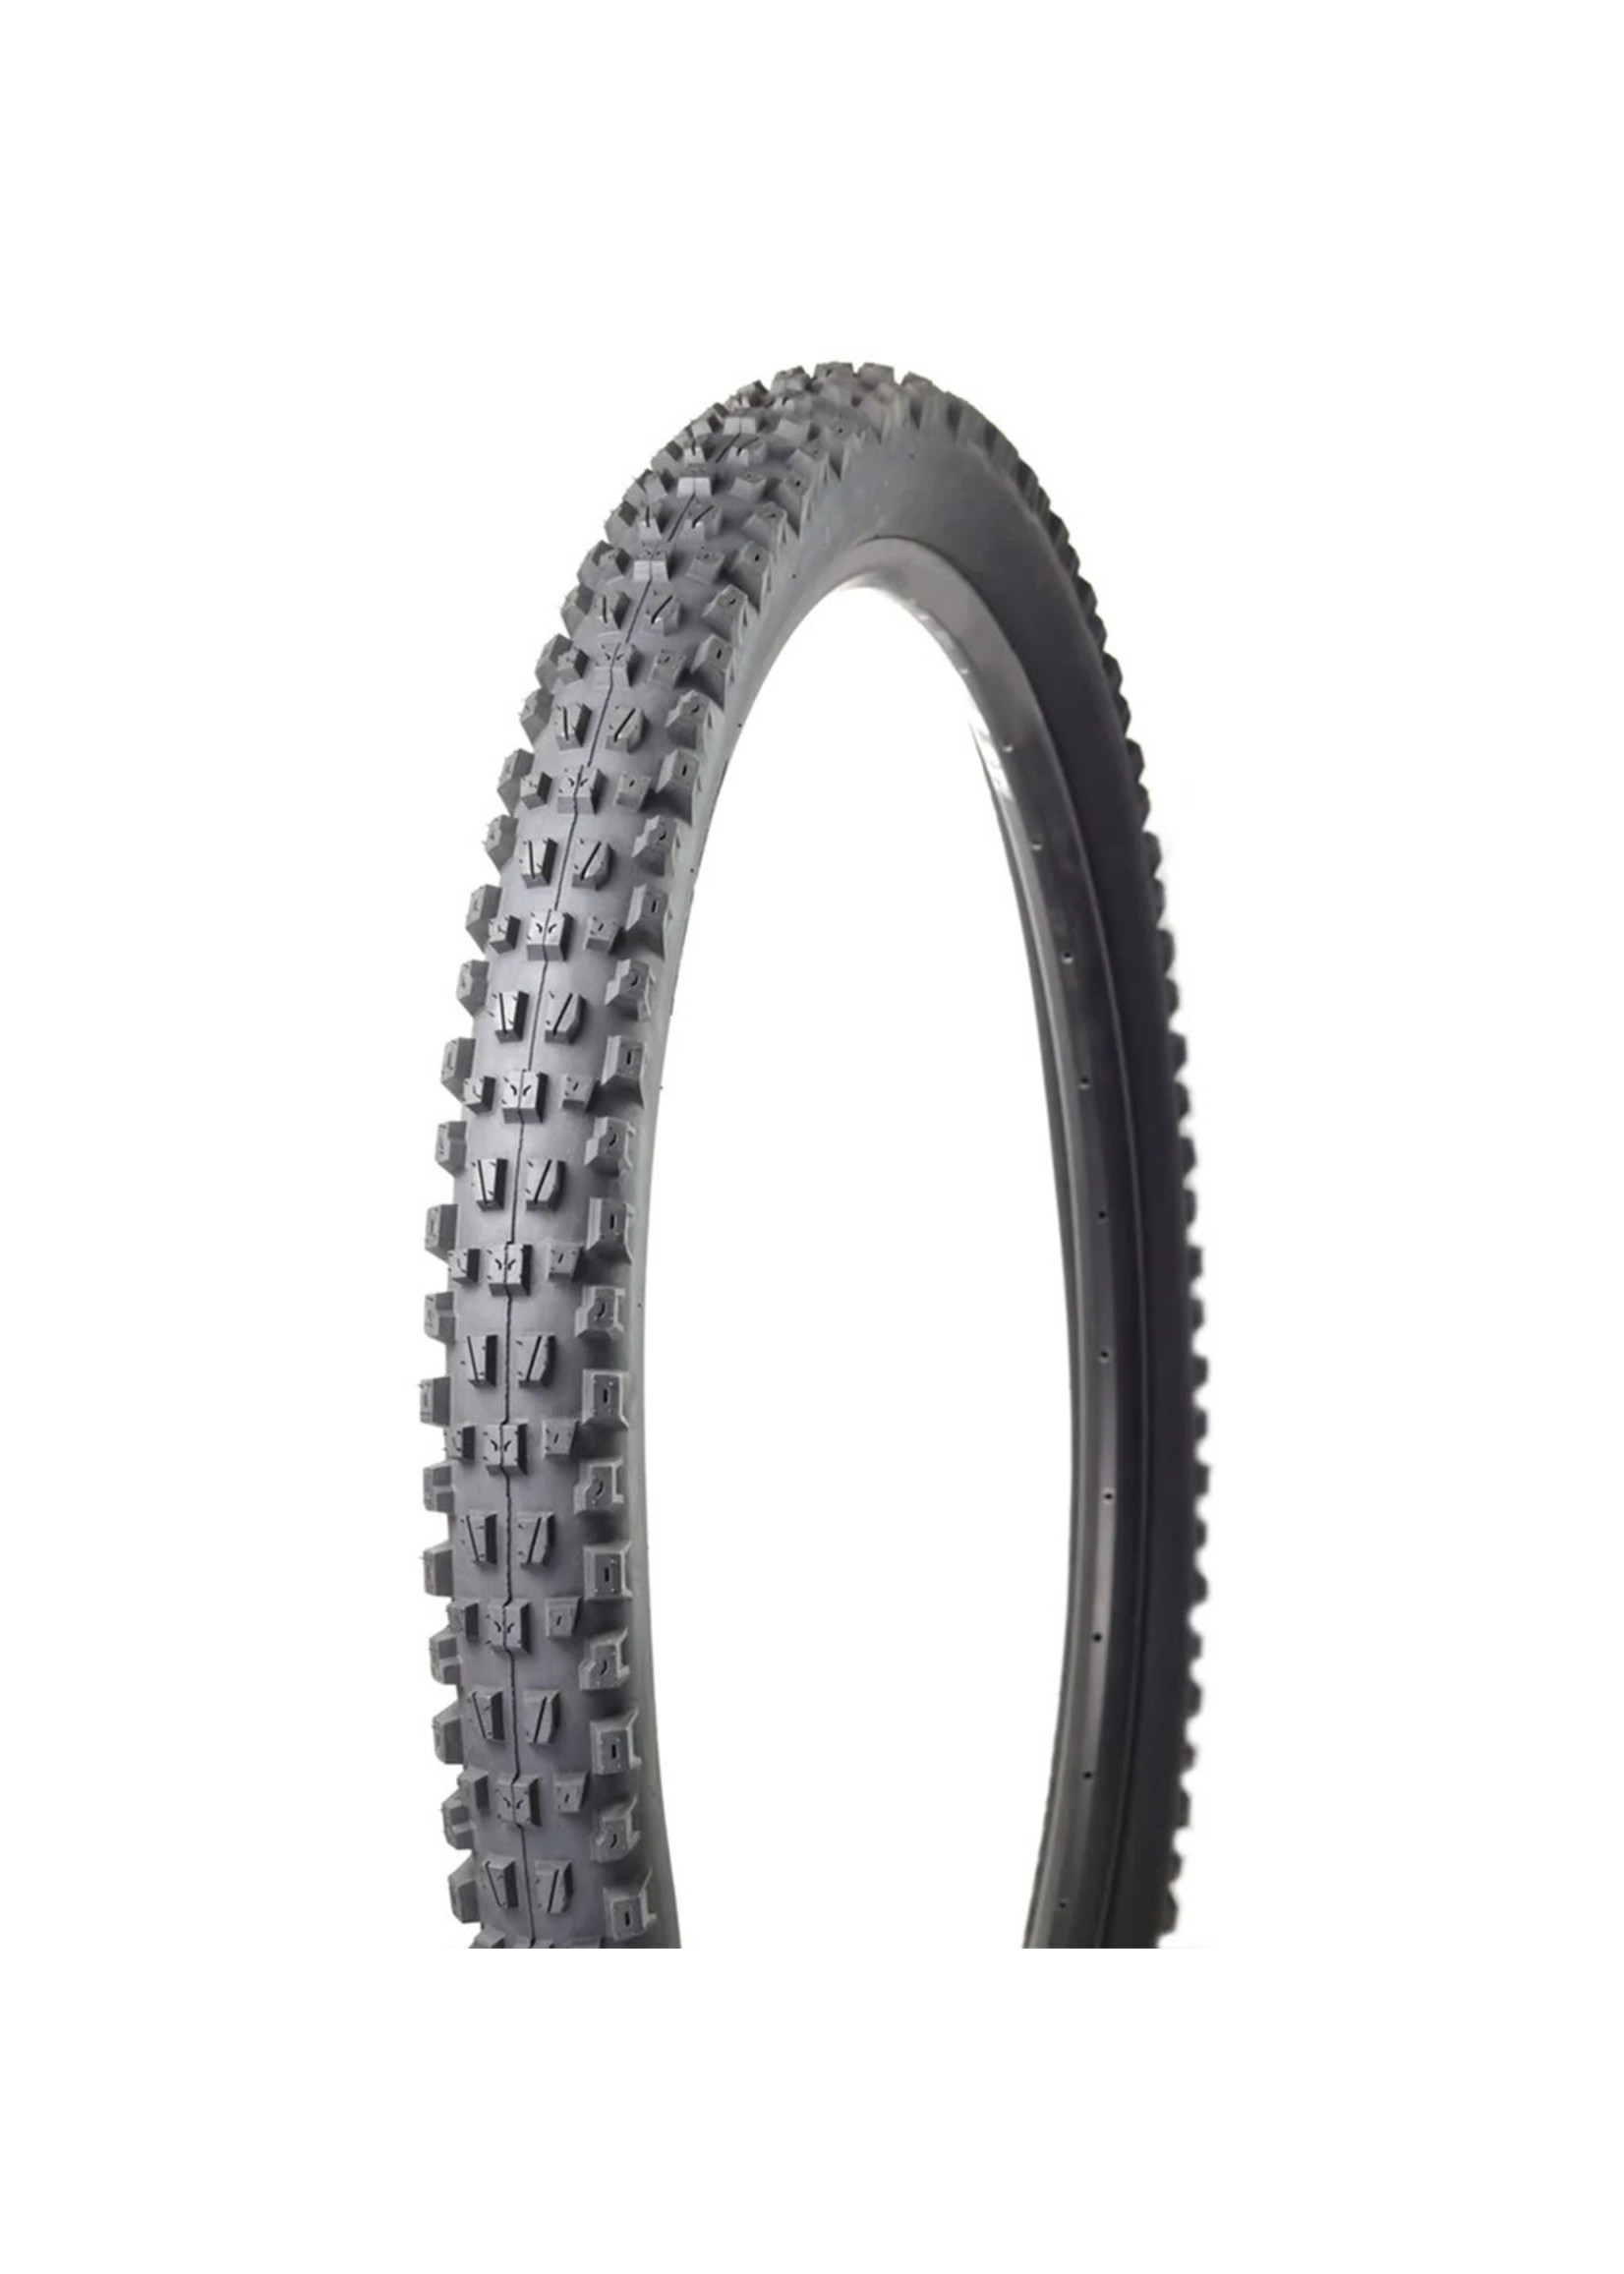 Delium Tires Delium Rugged Tire 29 x 2.50 Black Skinwall 62tpi Flexible Reinforced